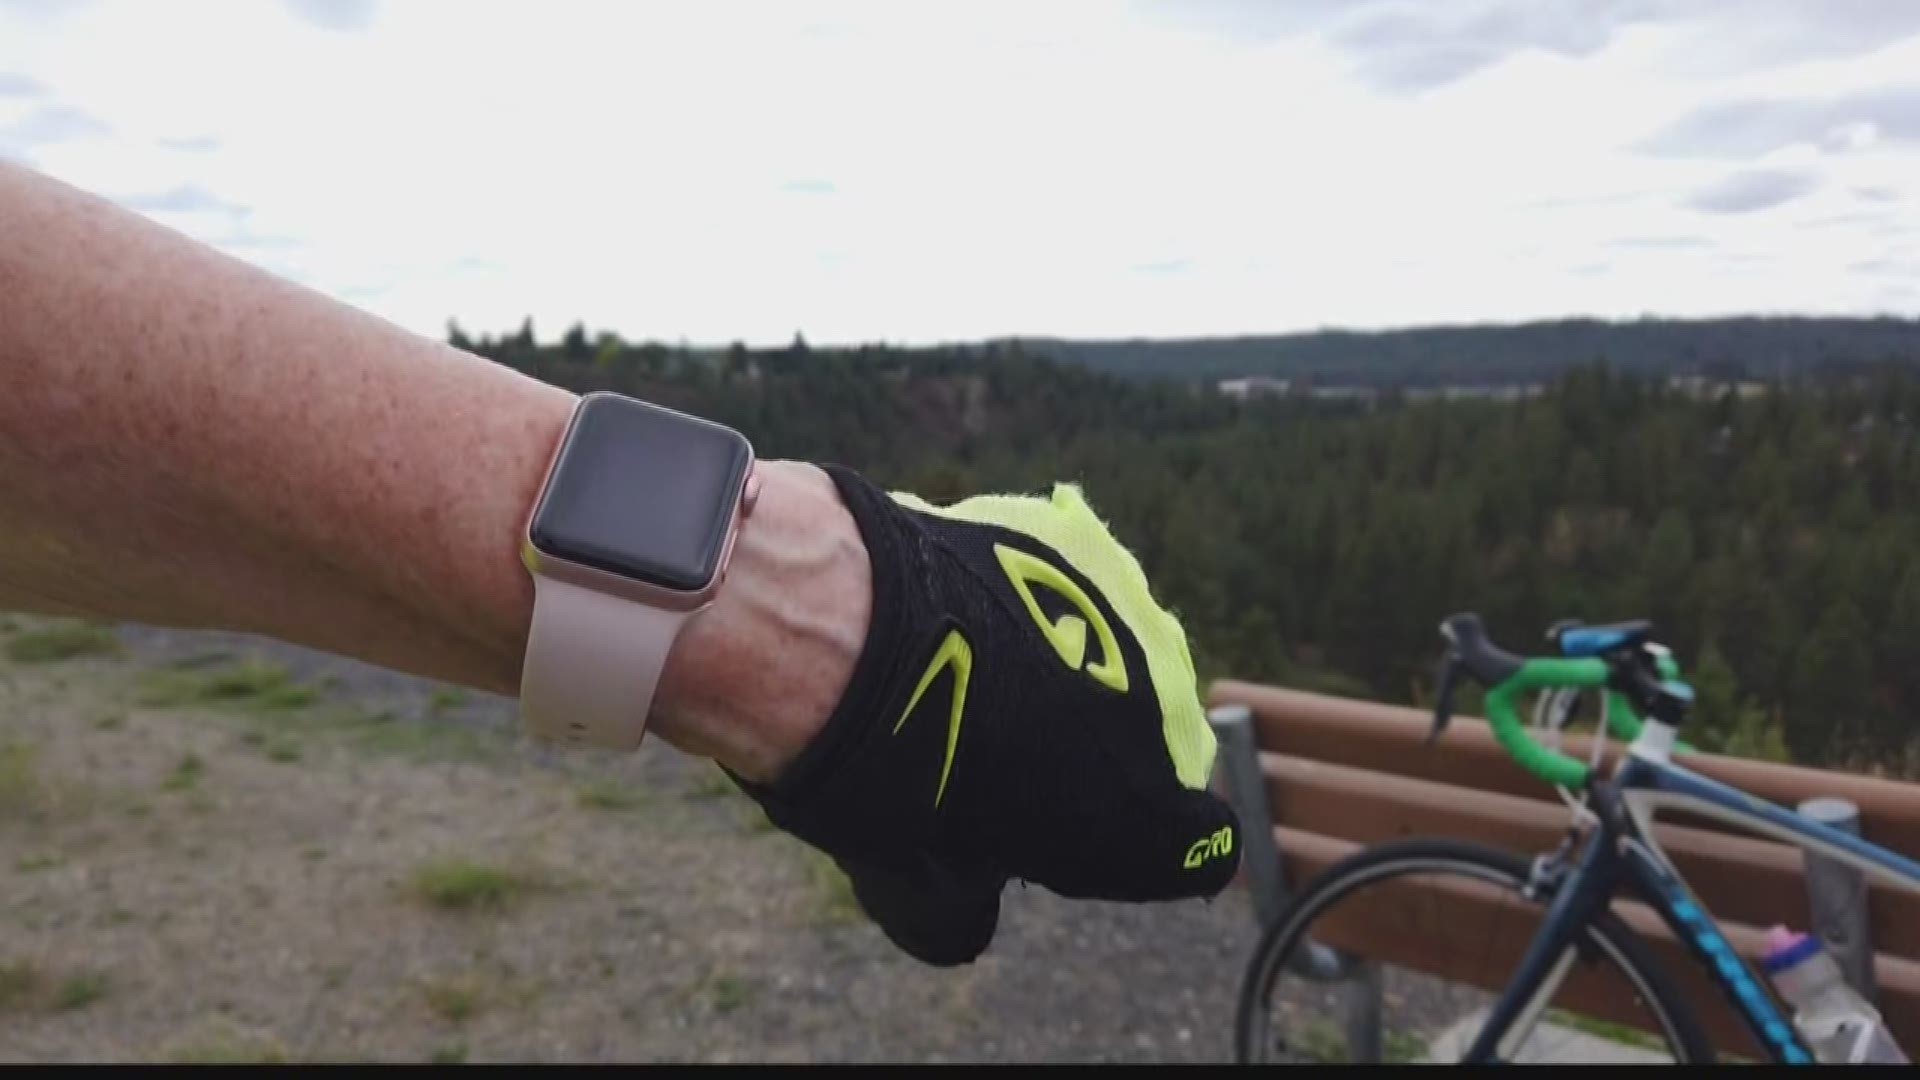 KREM's Brandon Jones spoke with a man who says his father was saved by his Apple Watch. His father's watch called 911 after he suffered a bicycle crash.